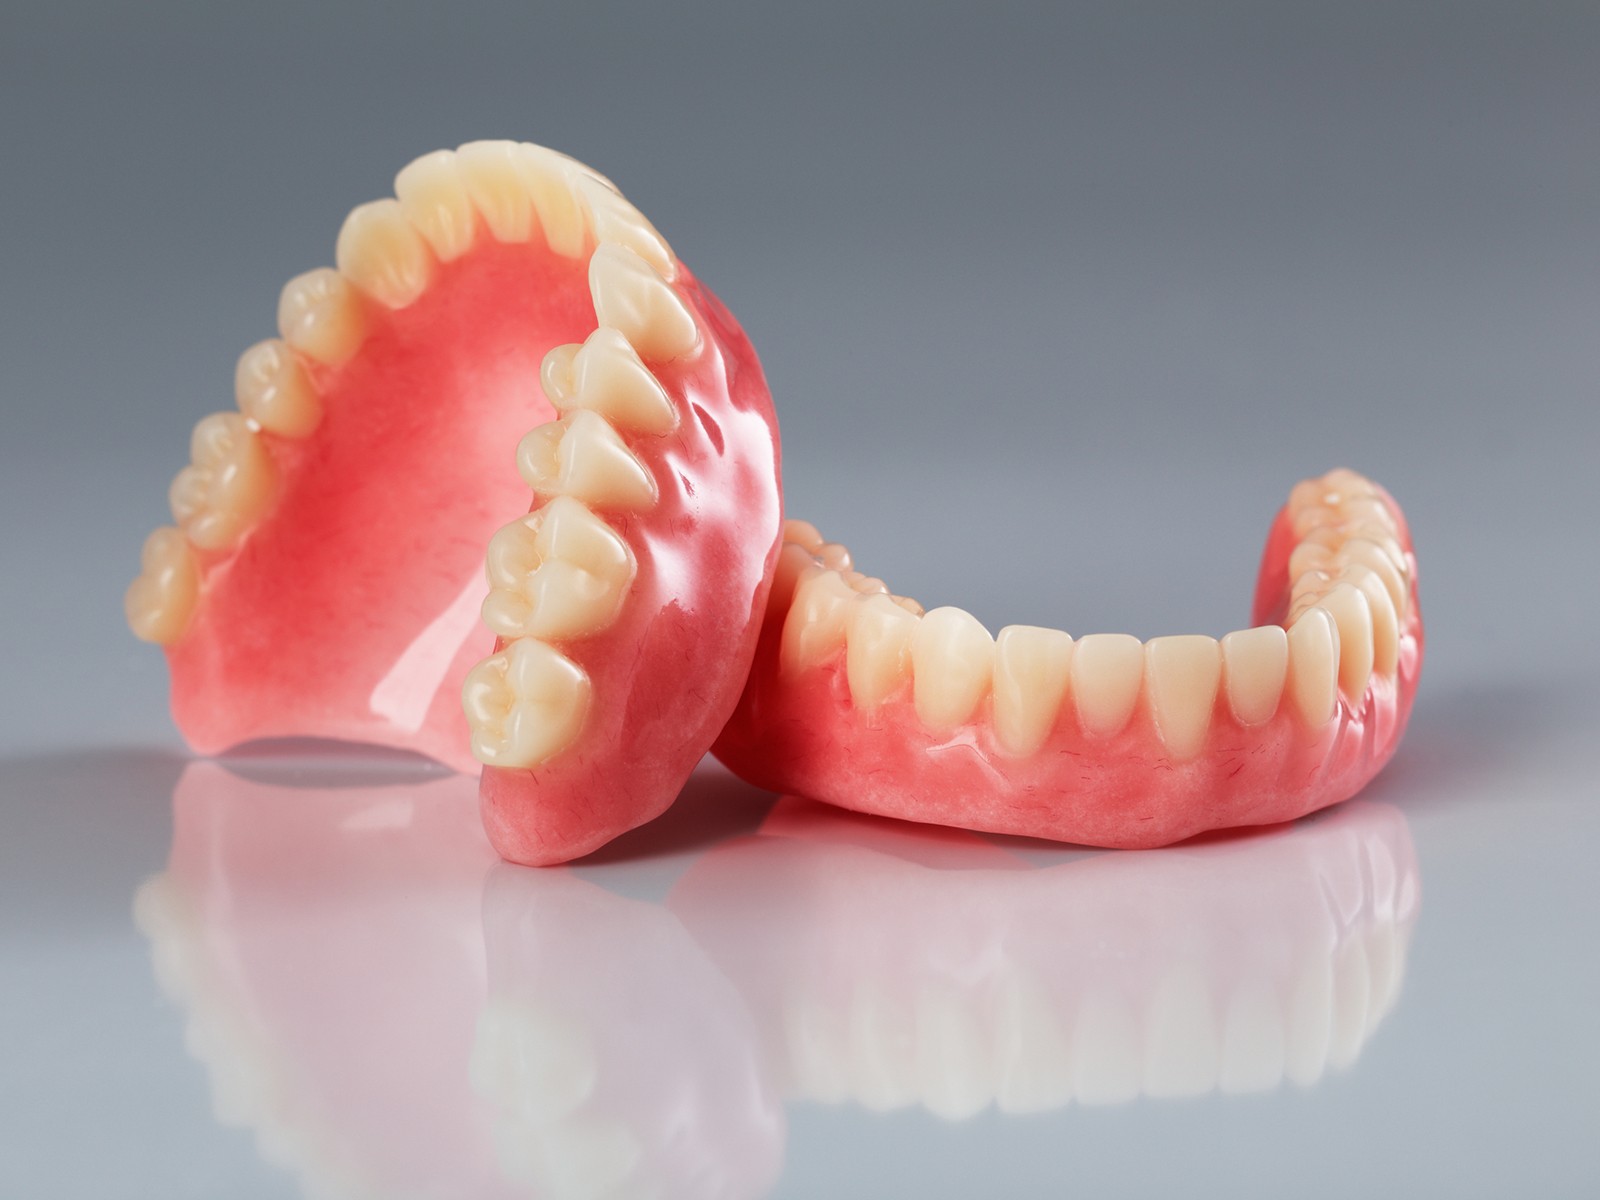 Are dentures covered by Medicare?